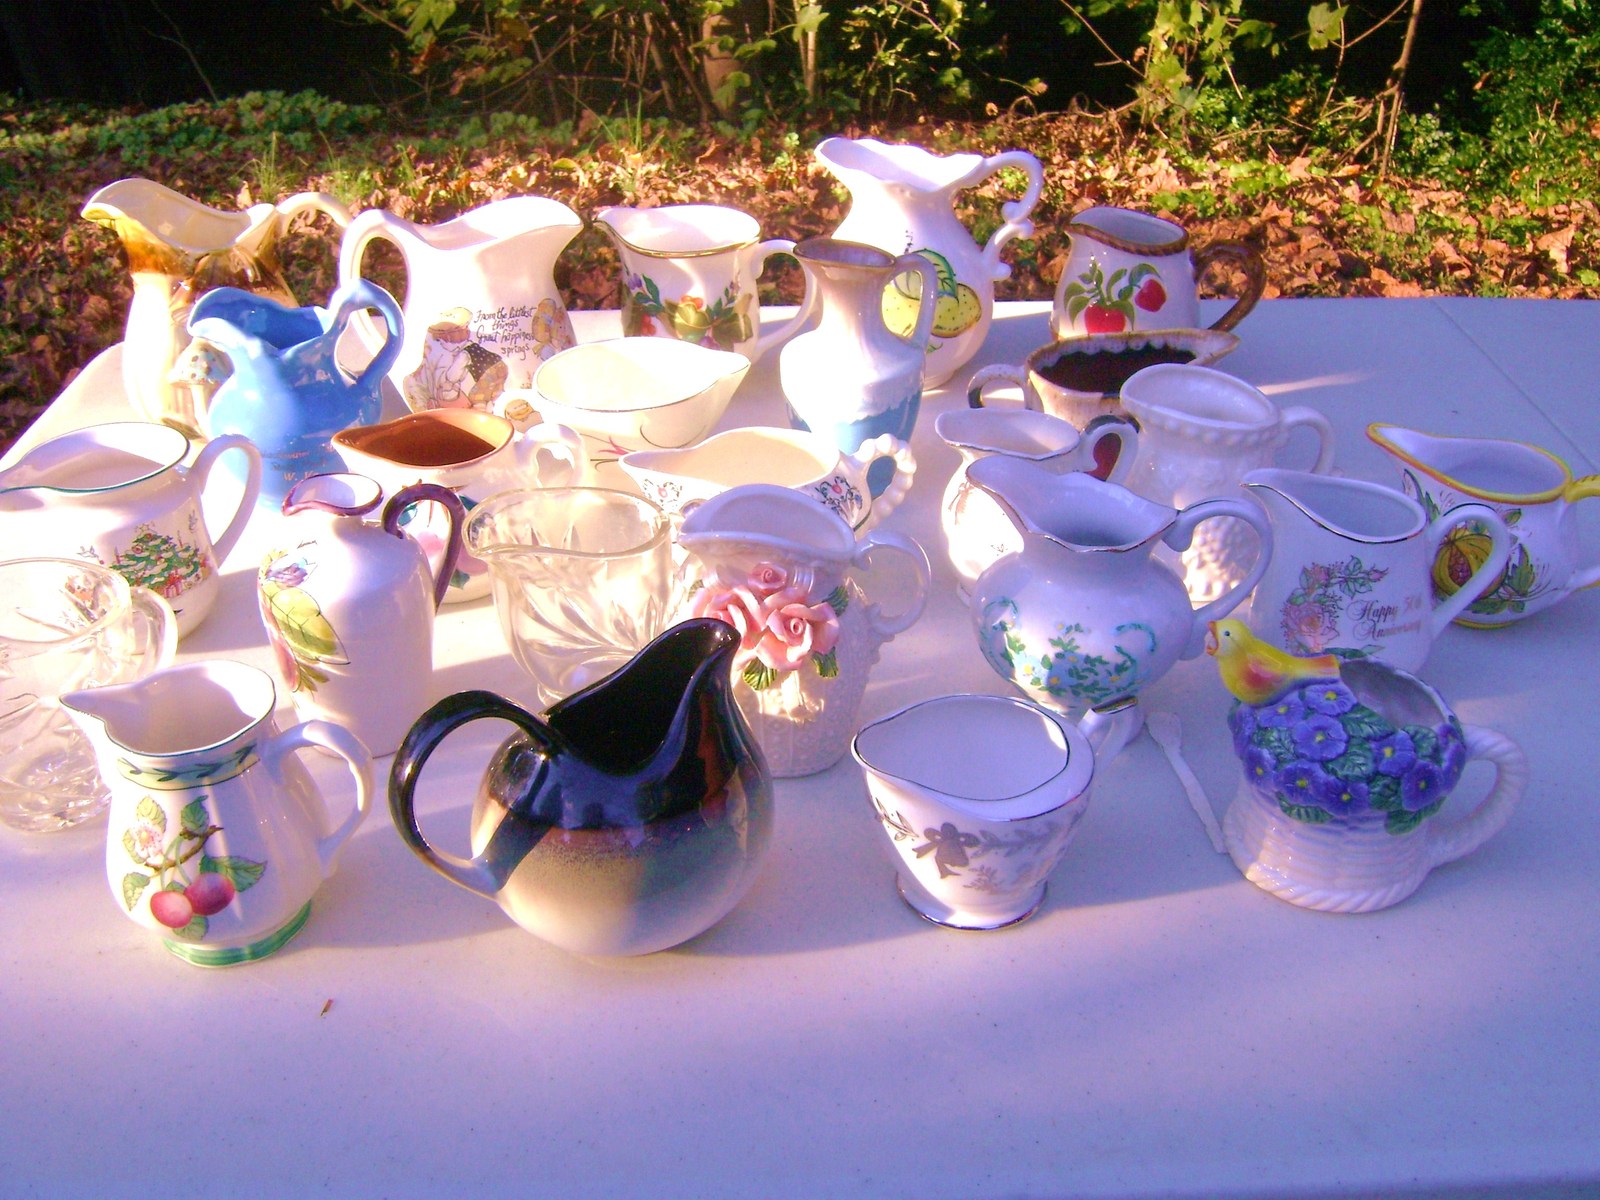 Pitchers and Creamers Lot 3 - $55.00